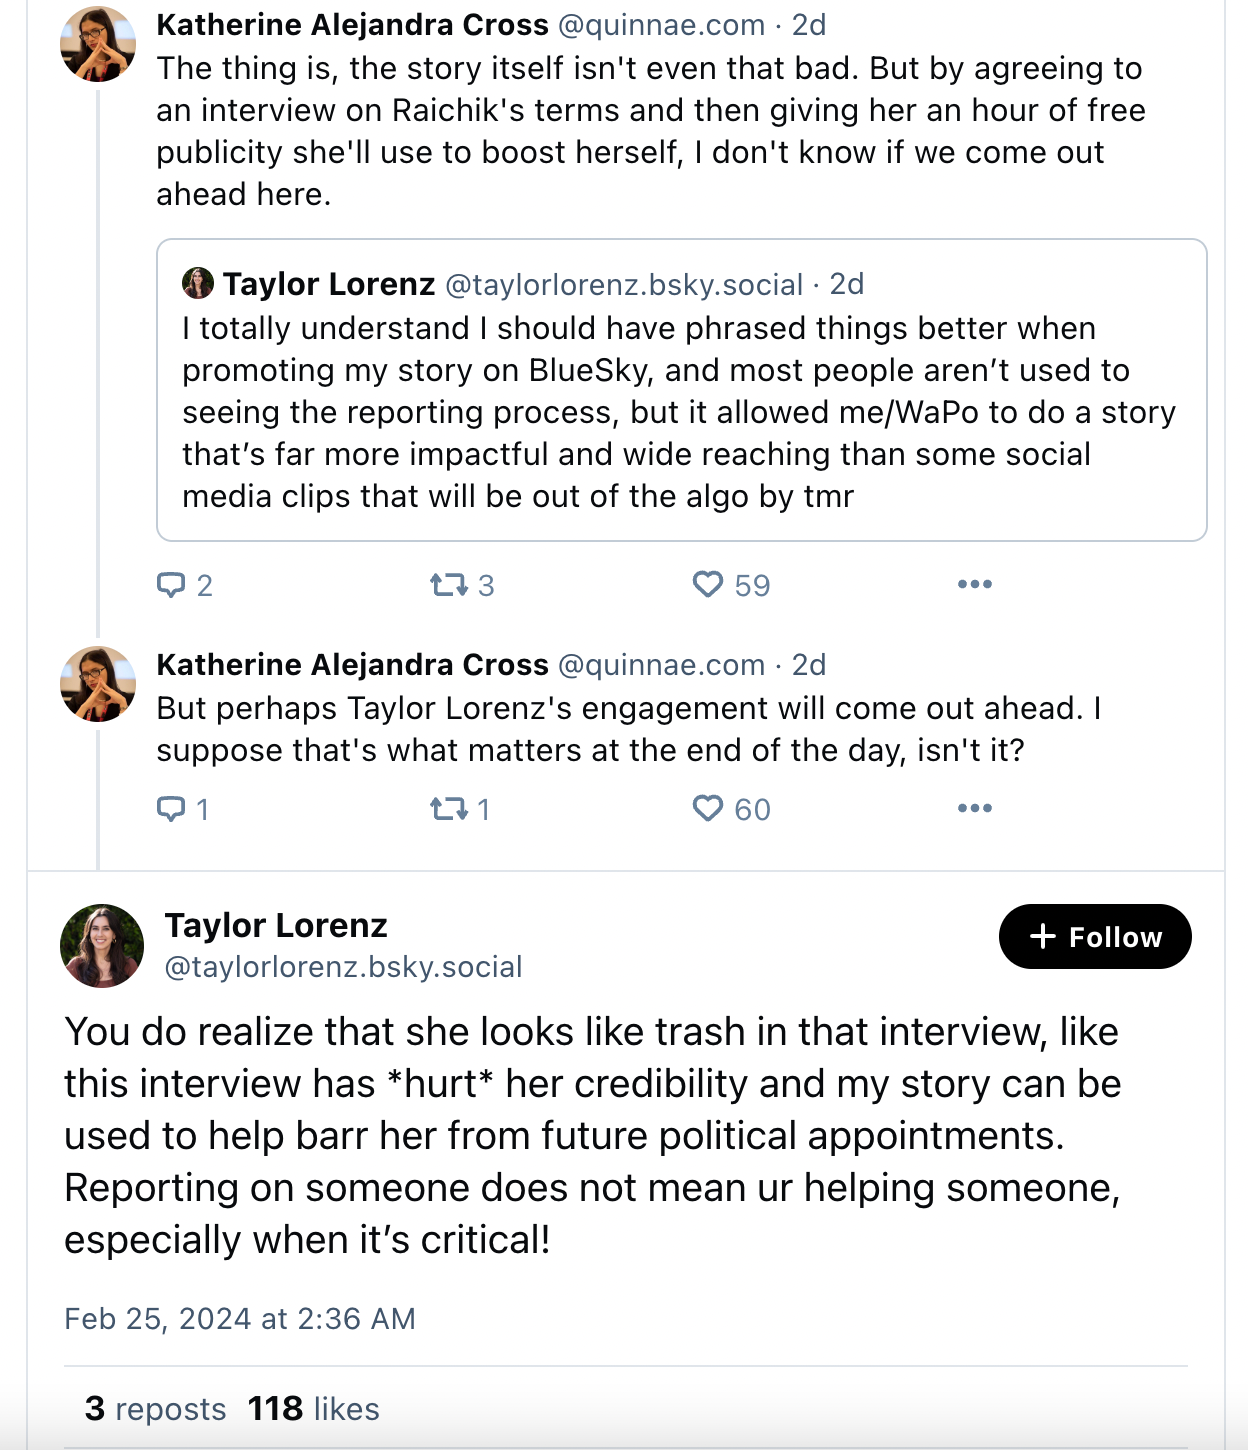 KATHERINE CROSS: The thing is, the story itself isn't even that bad. But by agreeing to an interview on Raichik's terms and then giving her an hour of free publicity she'll use to boost herself, I don't know if we come out ahead here.  But perhaps Taylor Lorenz's engagement will come out ahead. I suppose that's what matters at the end of the day, isn't it?  TAYLOR LORENZ: You do realize that she looks like trash in that interview, like this interview has *hurt* her credibility and my story can be used to help barr her from future political appointments. Reporting on someone does not mean ur helping someone, especially when it’s critical! Feb 25, 2024 at 2:36 AM 3 reposts 118 likes